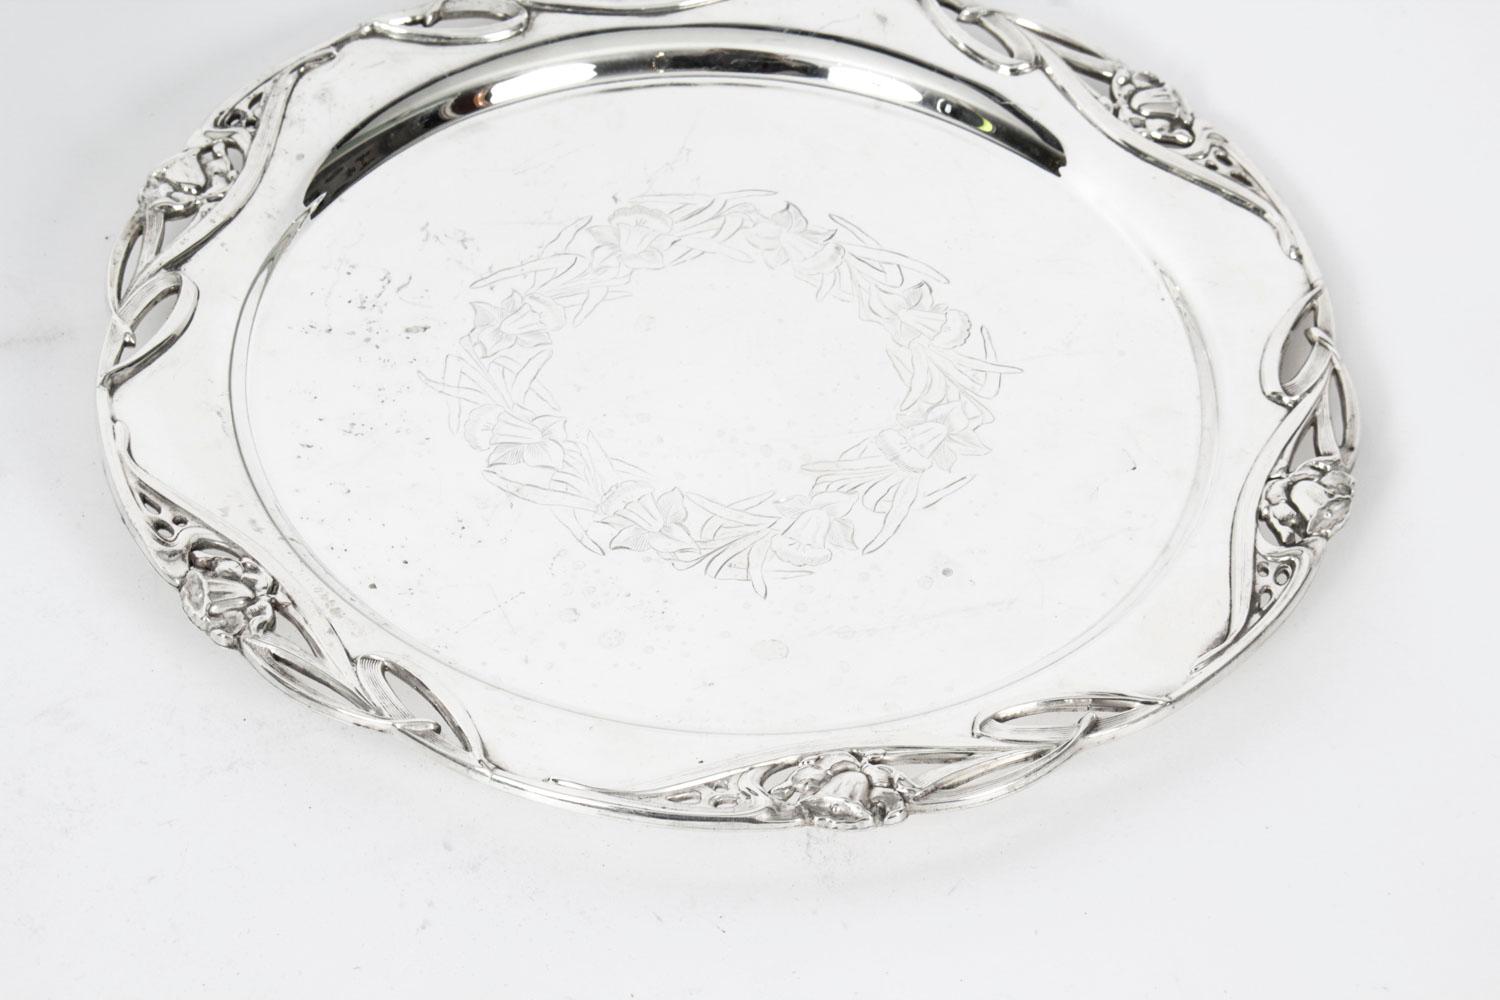 This is an exquisite English antique silver plated salver bearing the cross arrows makers mark, and the mark WH & S for William Hutton & Son, and the registration number Rd 458840.

Add an elegant touch to your next dining experience with this